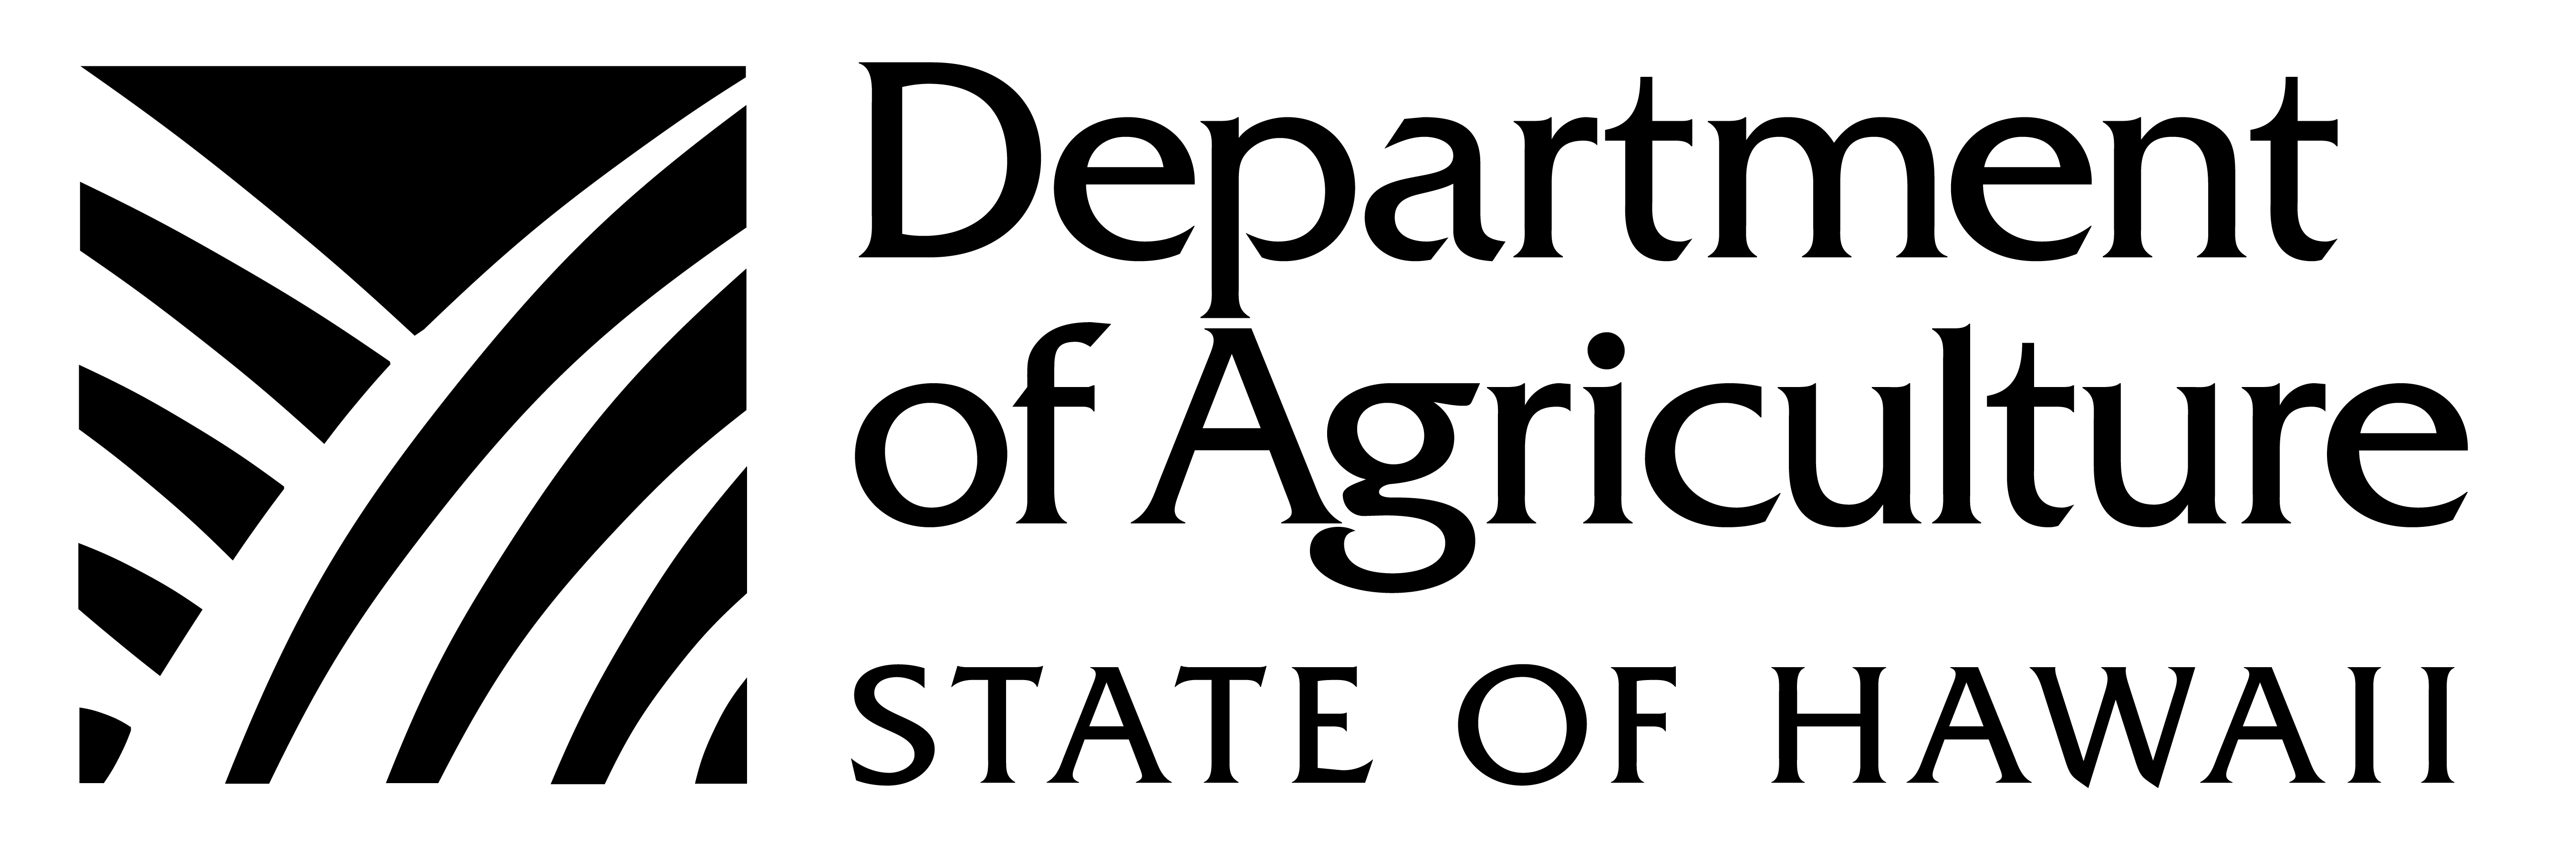 Hawaii Department of Agriculture 